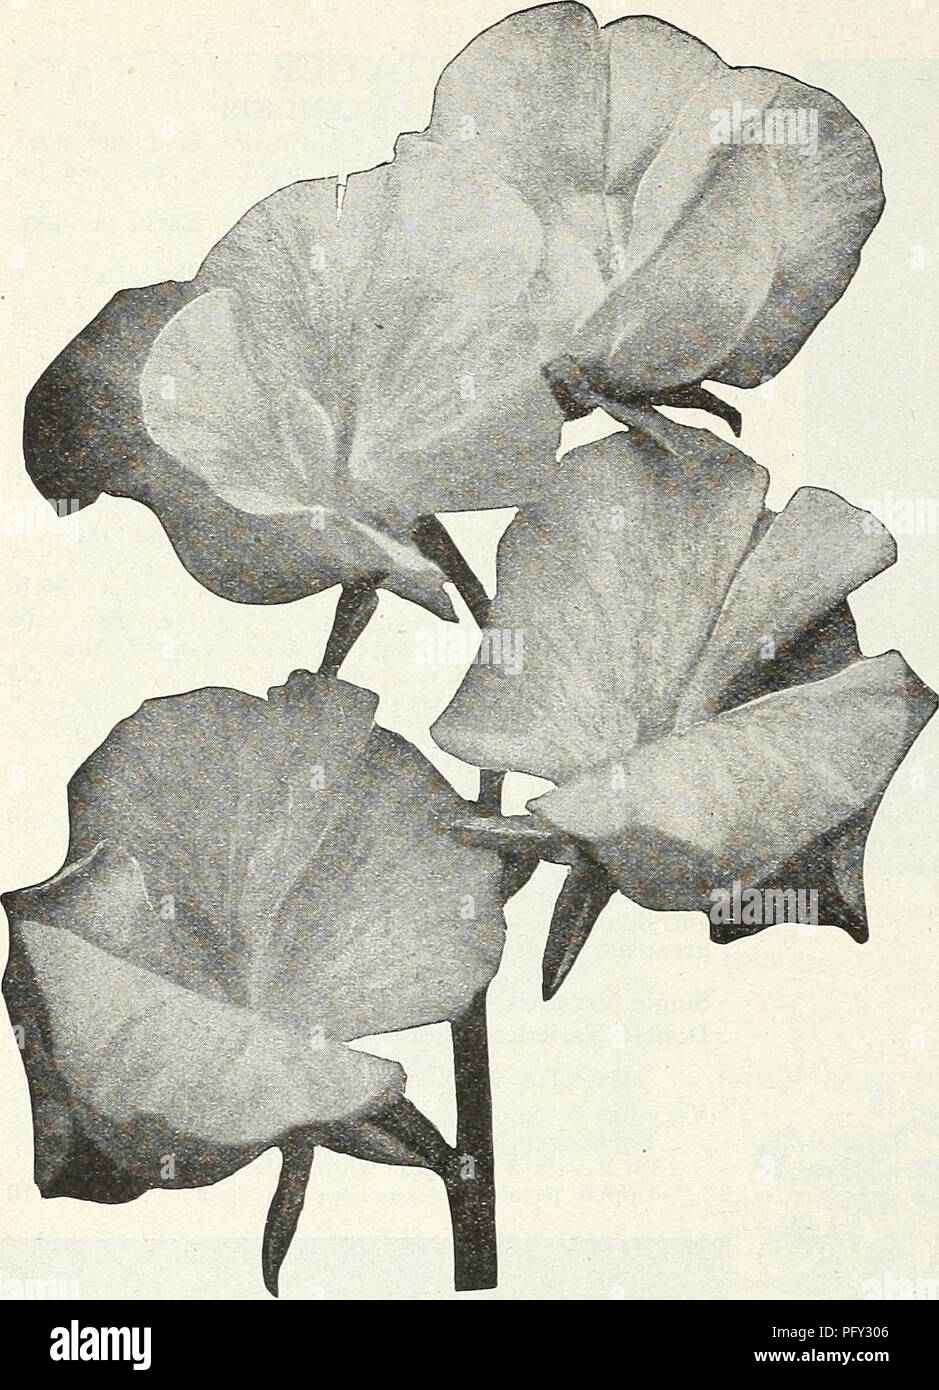 . Currie's garden annual : spring 1931 56th year. Flowers Seeds Catalogs; Bulbs (Plants) Seeds Catalogs; Vegetables Seeds Catalogs; Nurseries (Horticulture) Catalogs; Plants, Ornamental Catalogs; Gardening Equipment and supplies Catalogs. CURRIE BROTHERS CO. MILWAUKEE, WISCONSIN. SWEET PEAS Beautiful, Fragrant, Fashionable HOW TO GROW THEM Sweet Peas should be planted as early in spring as the ground can be worked. Rich loam with an abundance of well rotted manure is an ideal soil. A trench about 6 inches deep should be made, sowing the seed thinly in the bottom, and cover with an inch of soil Stock Photo